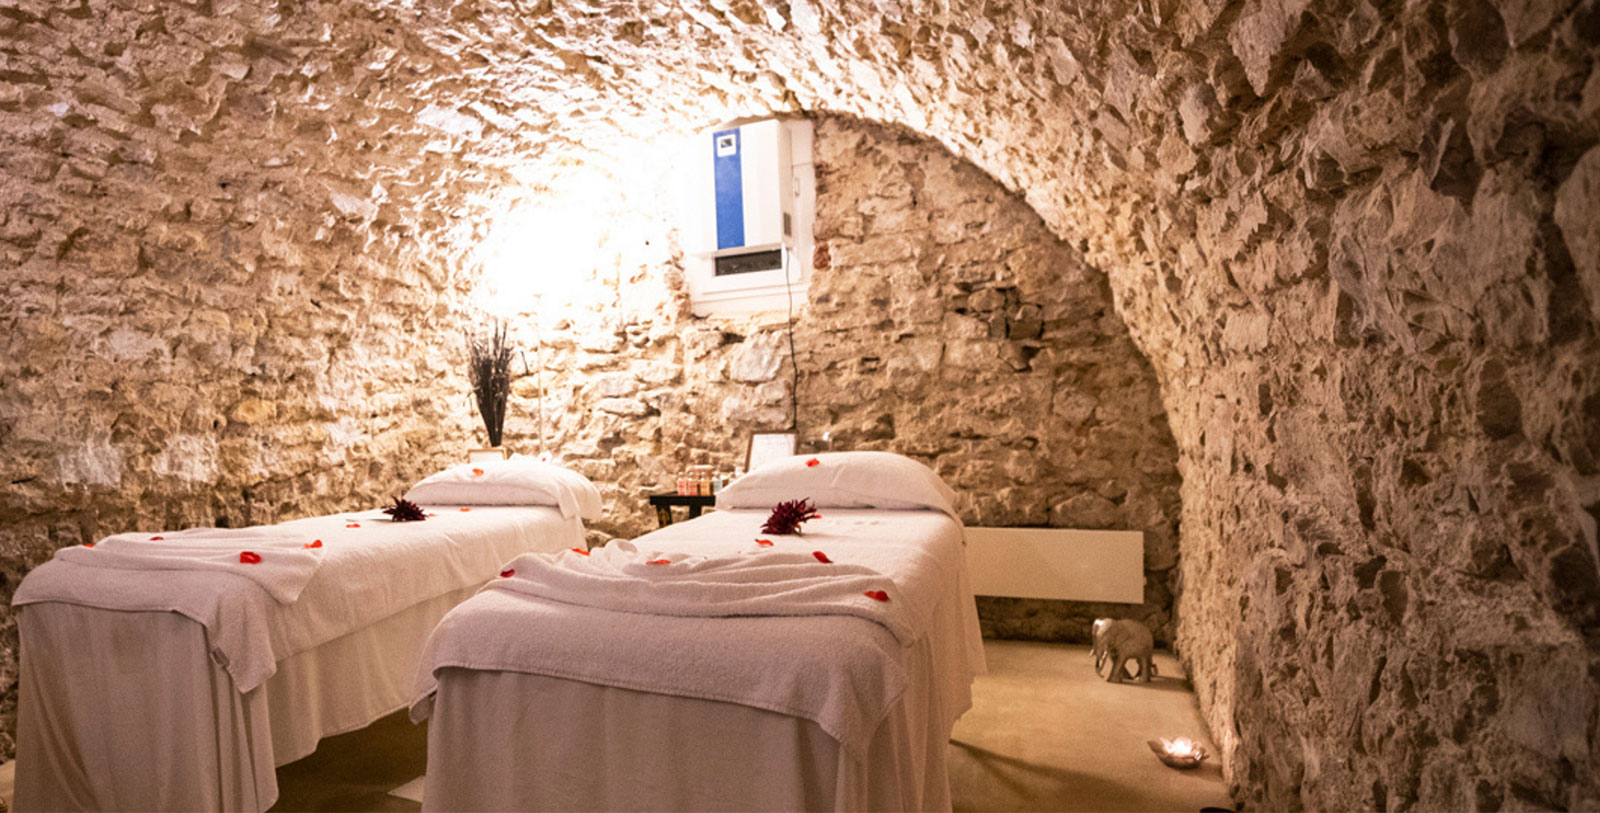 Experience rejuvenating treatments at the hotel’s Wellness Center - based on eastern traditions and influenced by the hotel’s baroque origins.